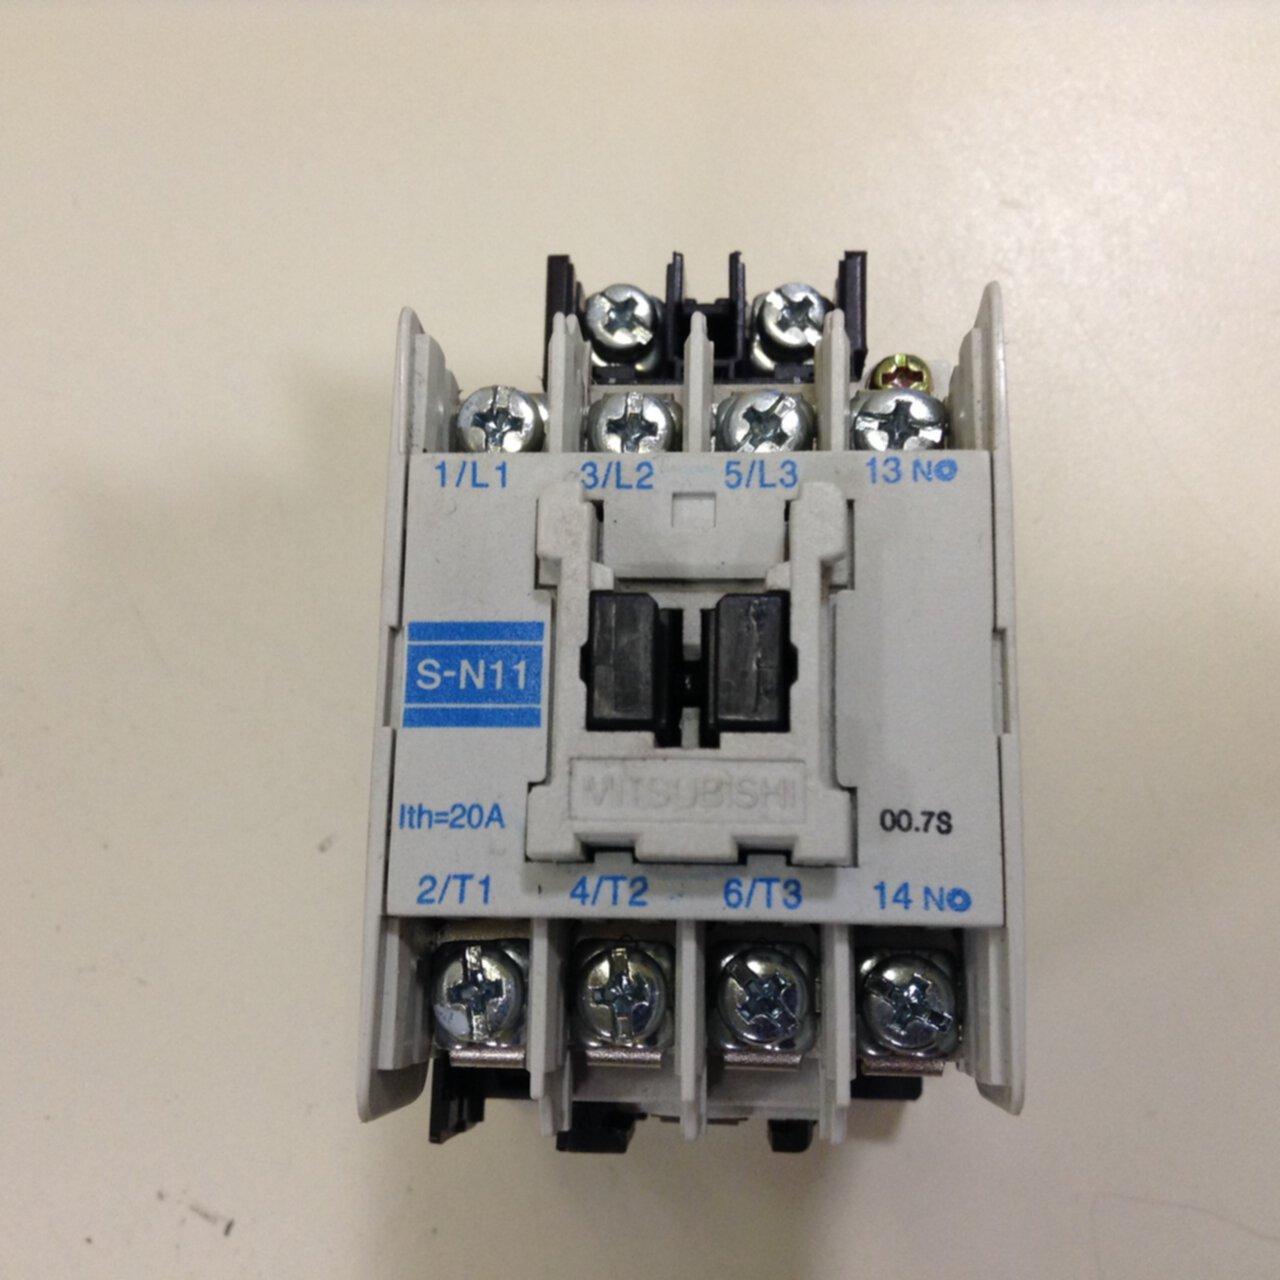 1pc Mitsubishi Magnetic Contactor S-n11 110vac GV for sale online 